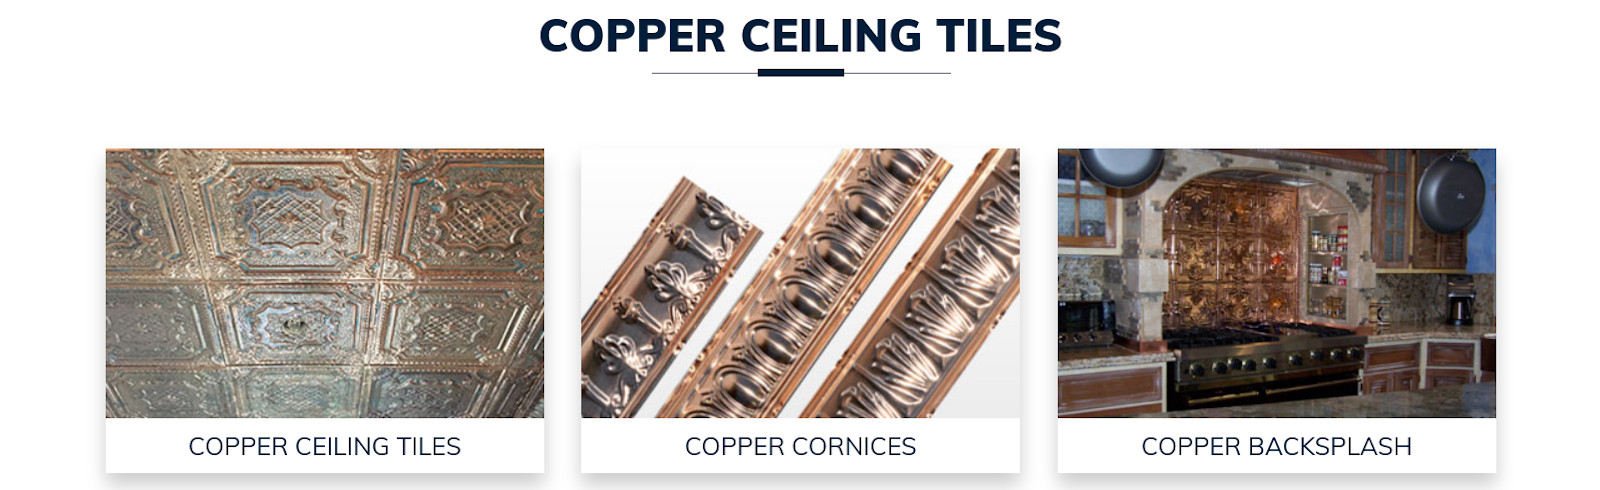 copper ceiling tiles low price